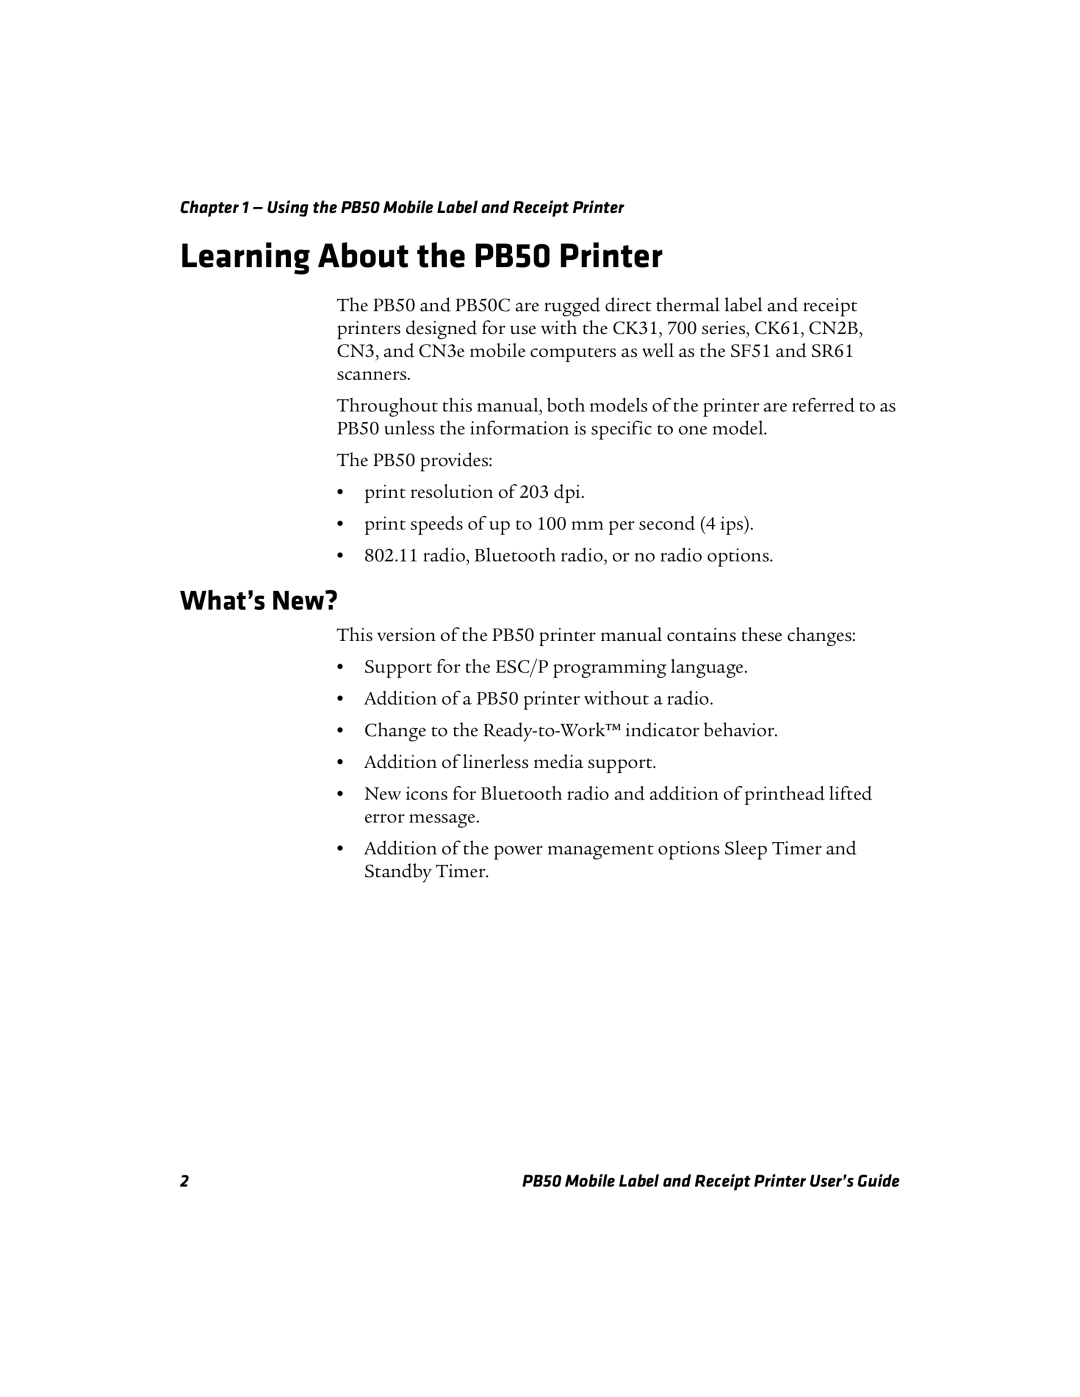 Intermec manual Learning About the PB50 Printer, What’s New? 